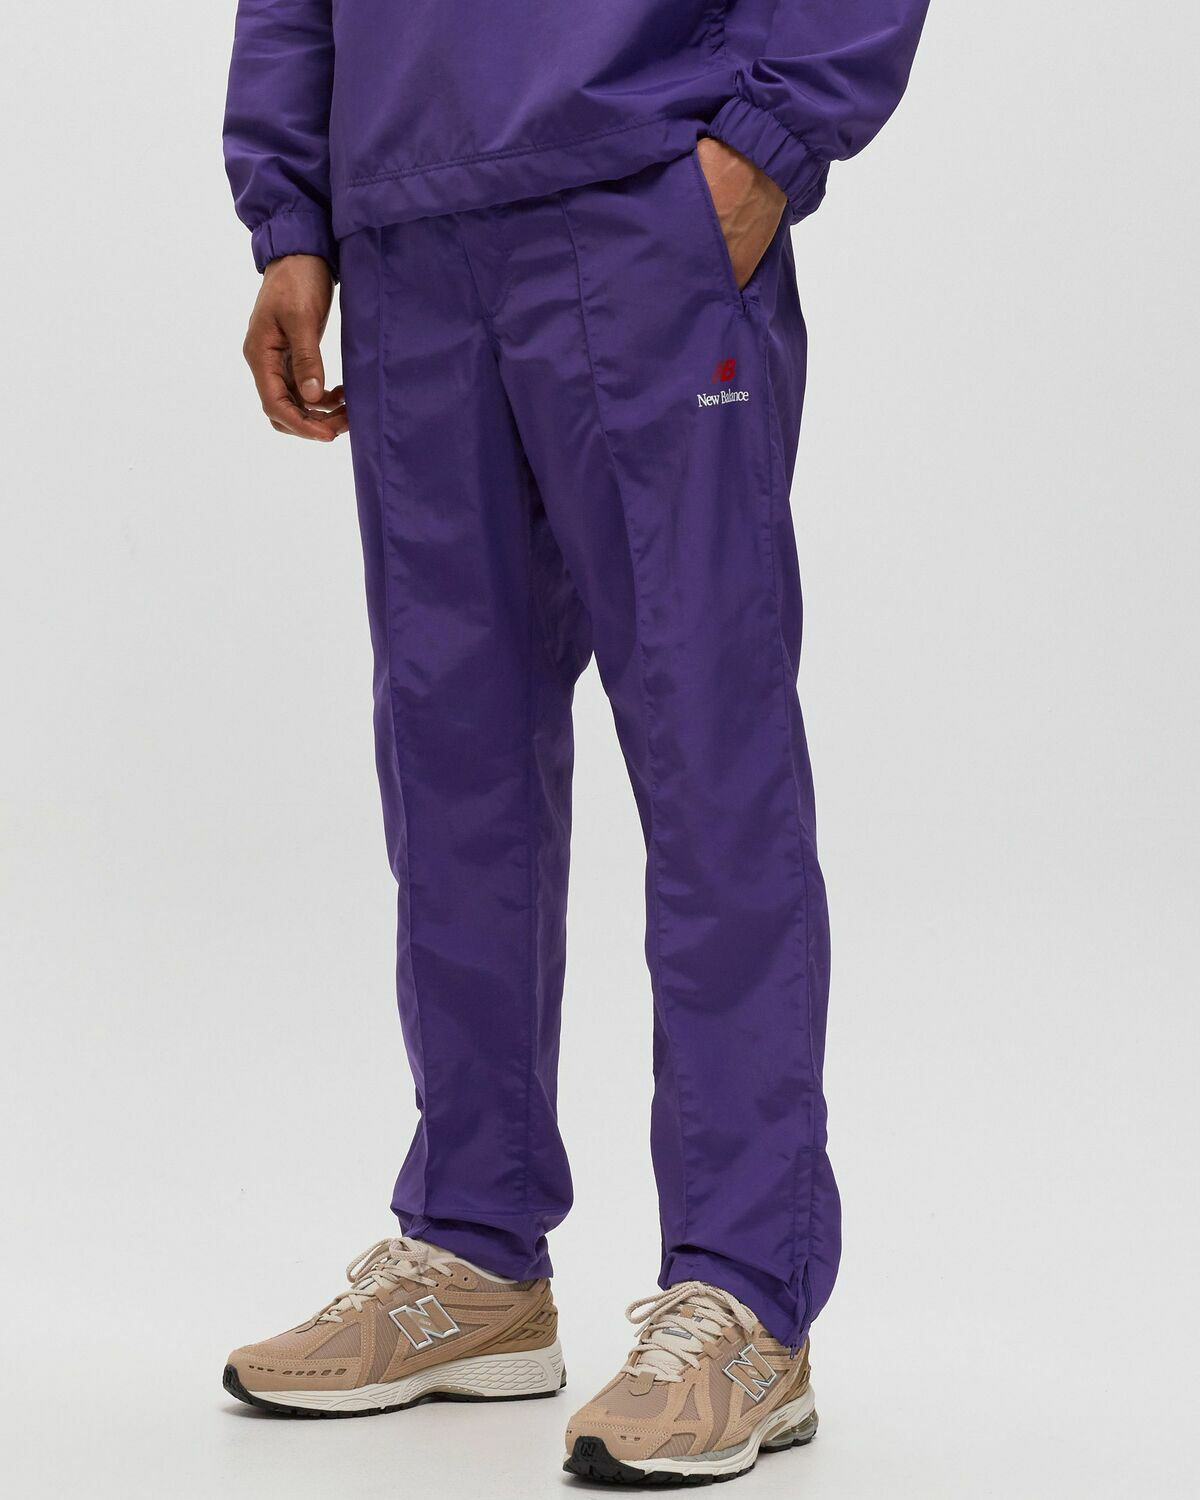 Pin on track pant